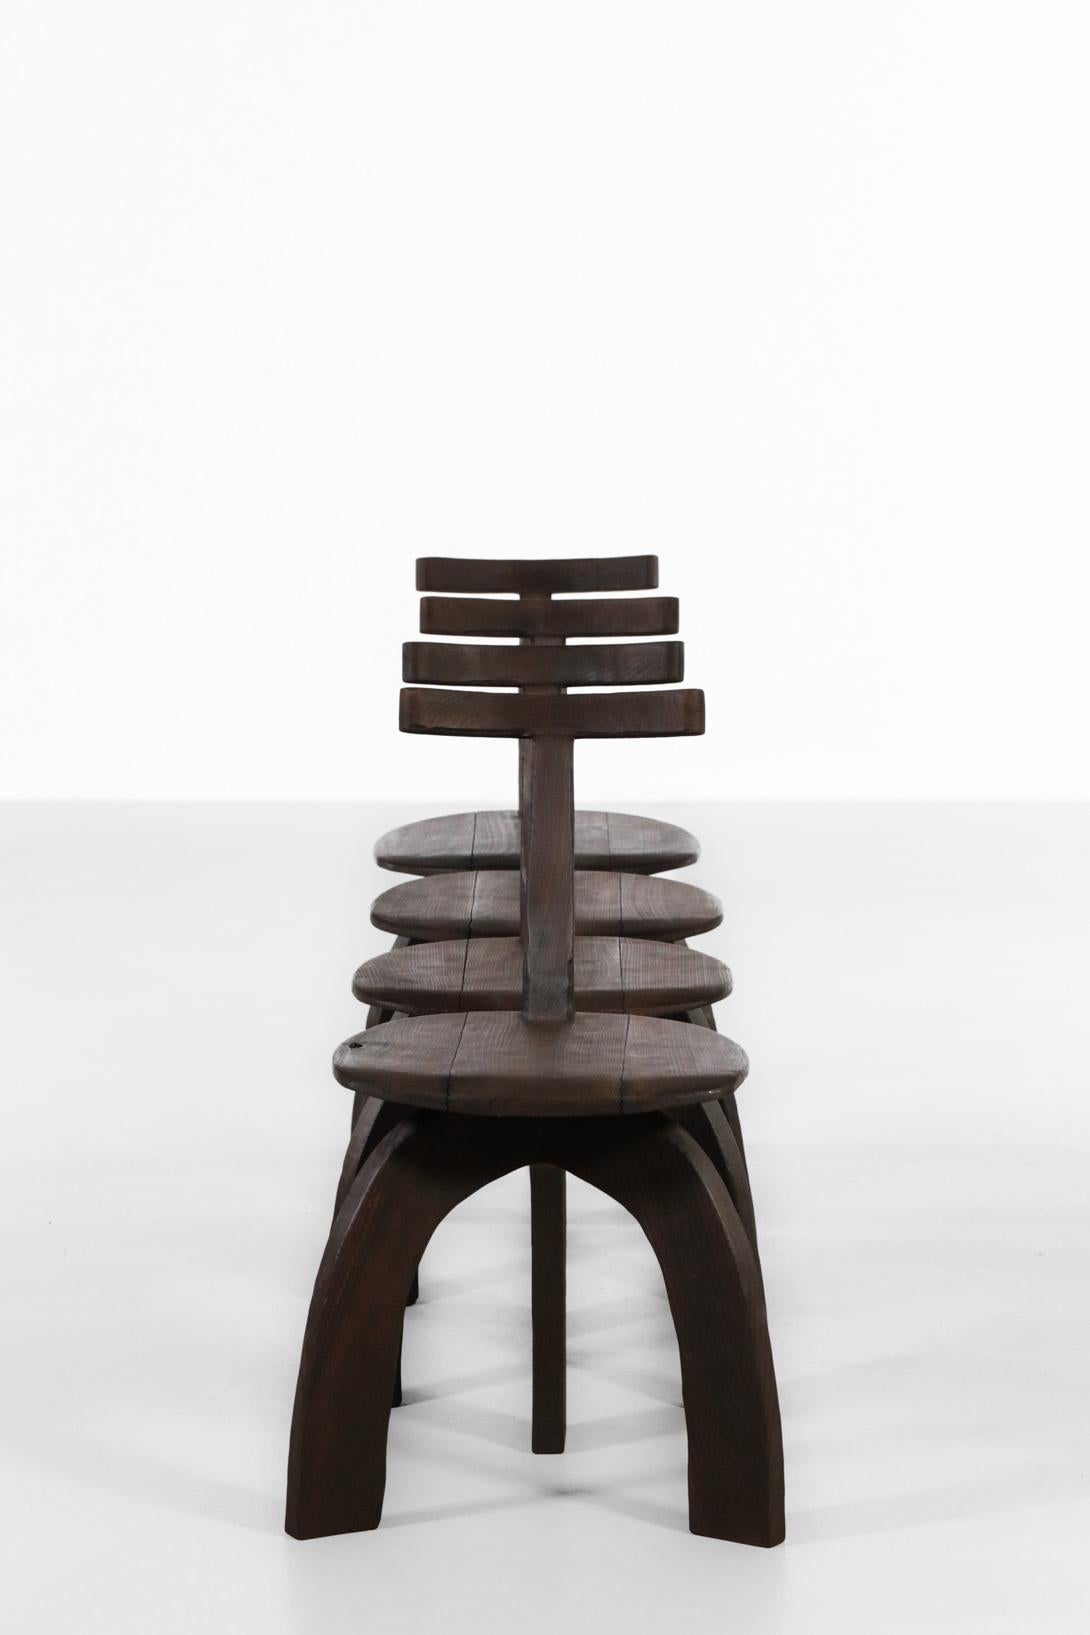 Modern Handcrafted Wooden Chair 80/20 by Vincent Vincent olavi hanninen perriand For Sale 3